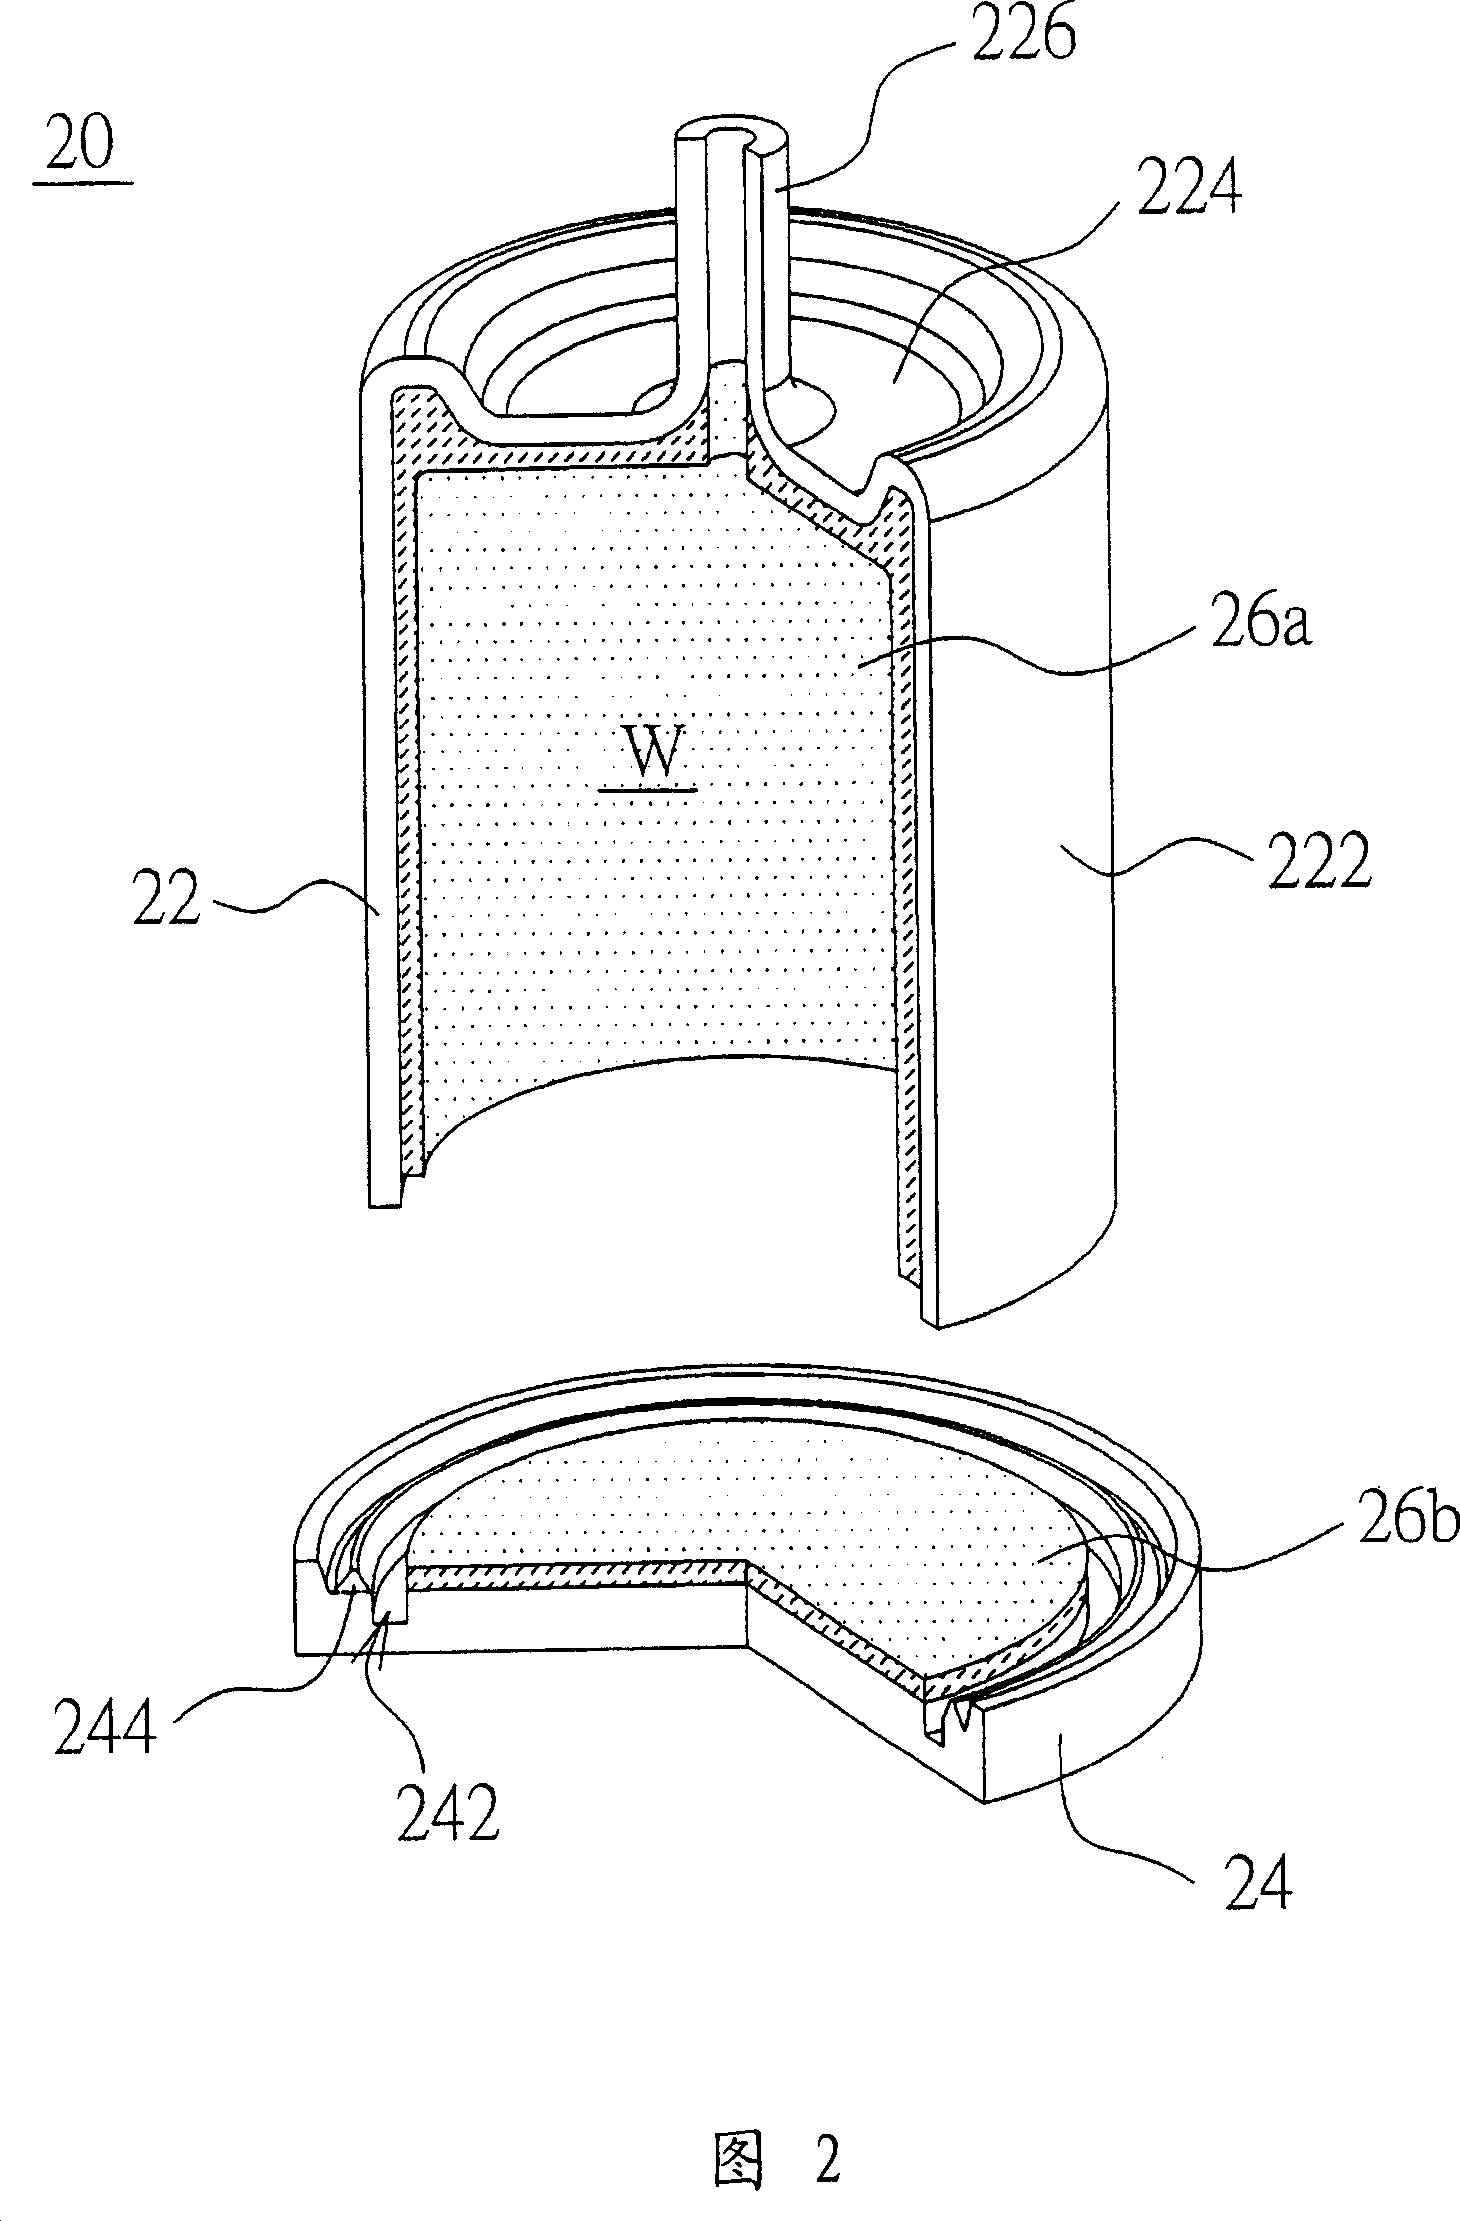 Radiation module and its heat pipe